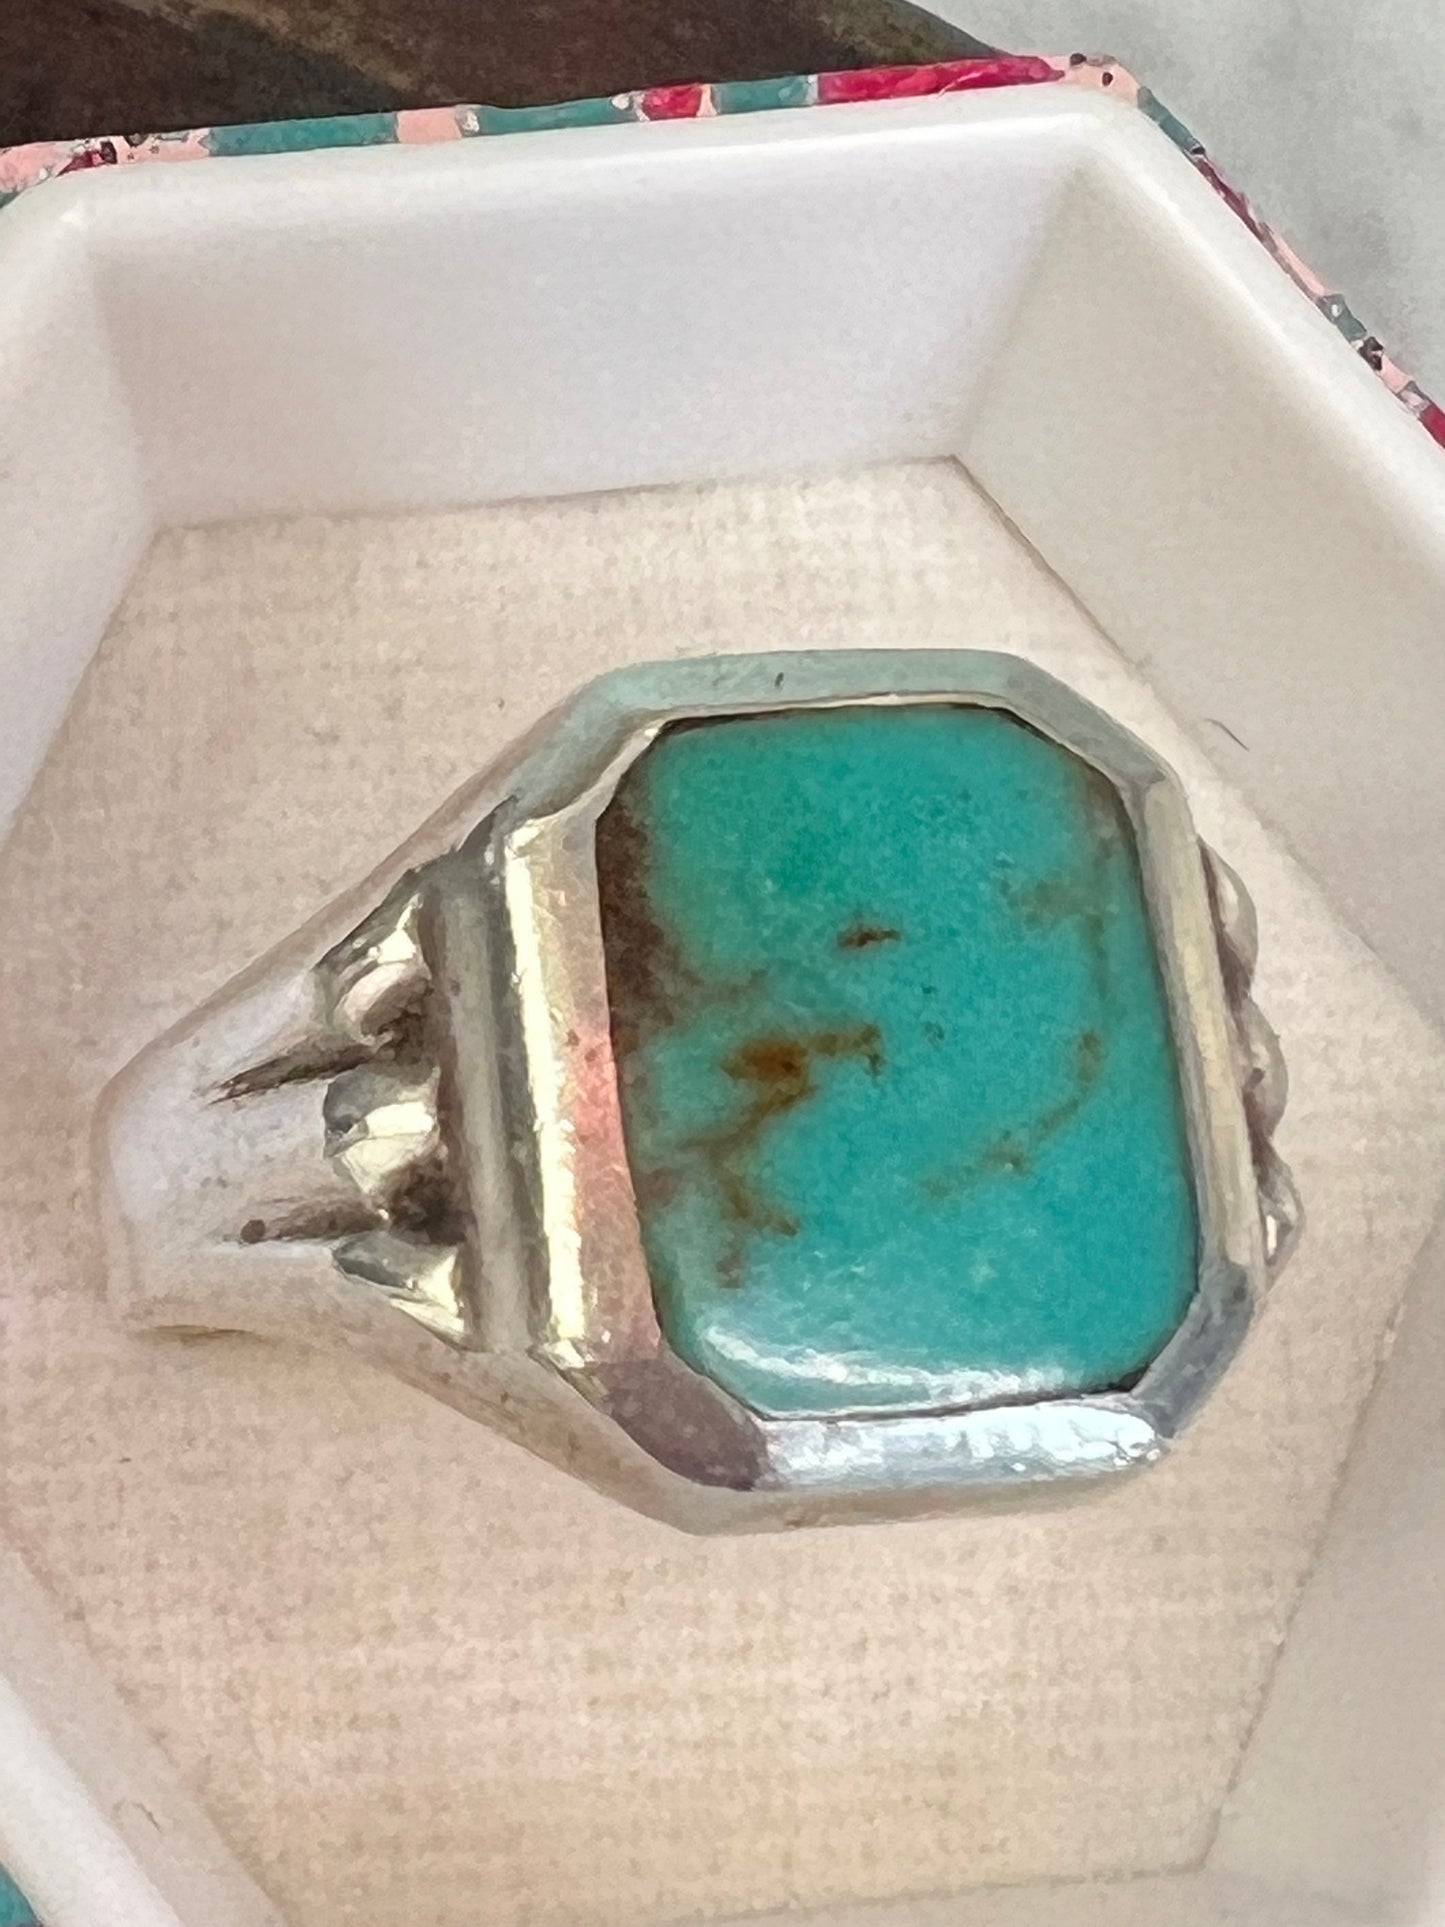 Vintage Mexican Sterling Silver & Turquoise Semi Precious Gemstone Signet Ring Size 11.5